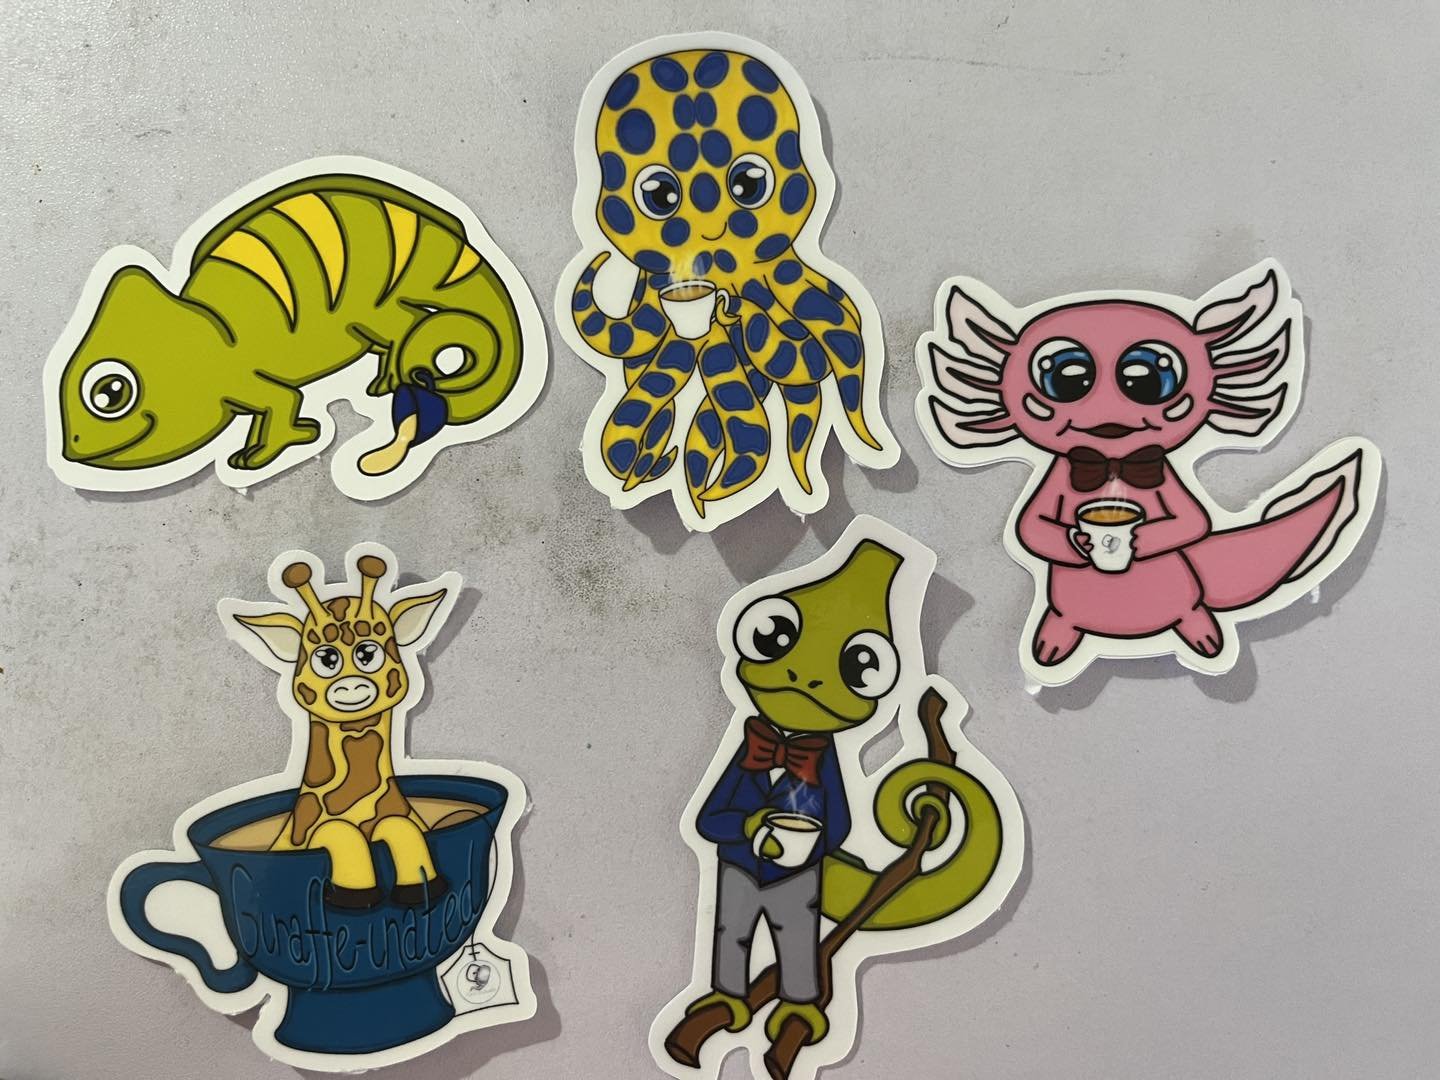 Our Tea Pets!!! Aren&rsquo;t they just adorable?? These stickers will be available tomorrow at our event and very soon on our website! 
.
.
#mteakettle #teafling #teapet #teapets #teatime #teatime☕️ #teatime🍵 #stickers #stickersale #stickershop #cut